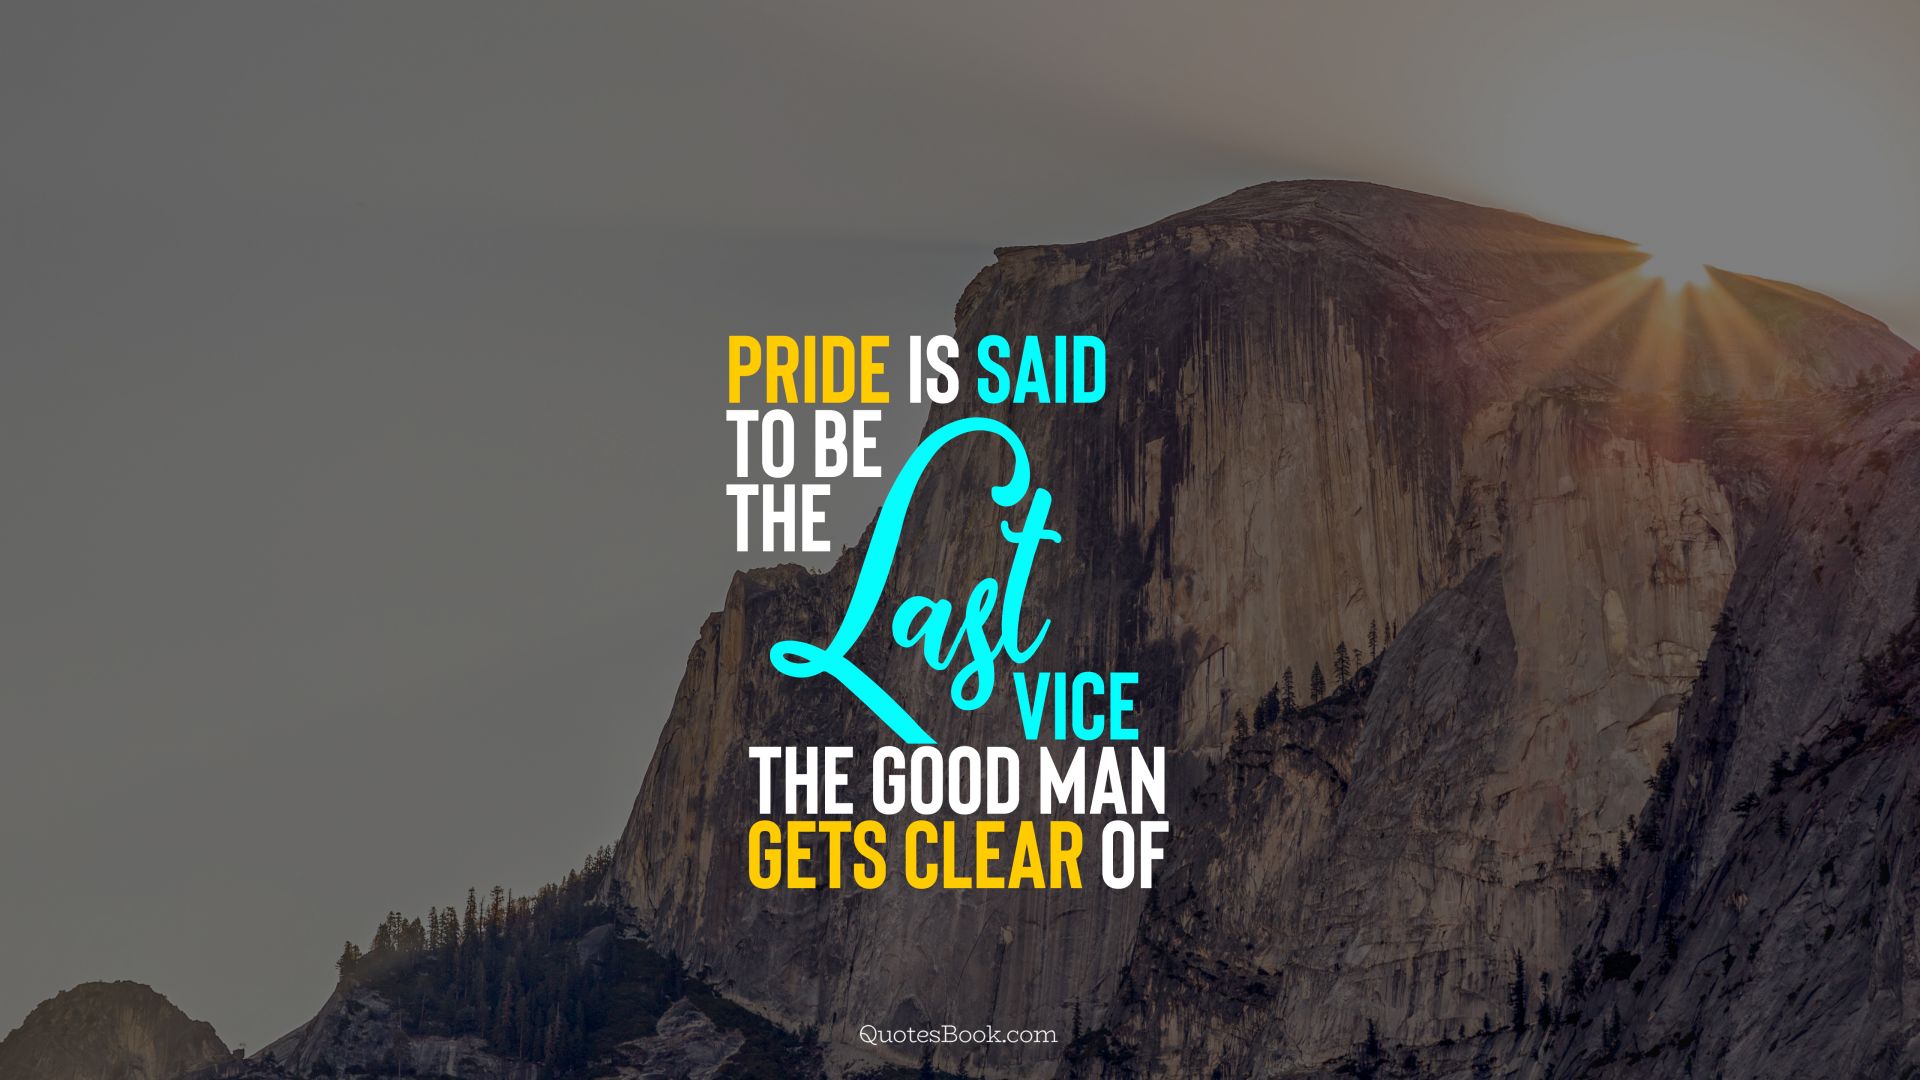 Pride is said to be the last vice the good man gets clear of